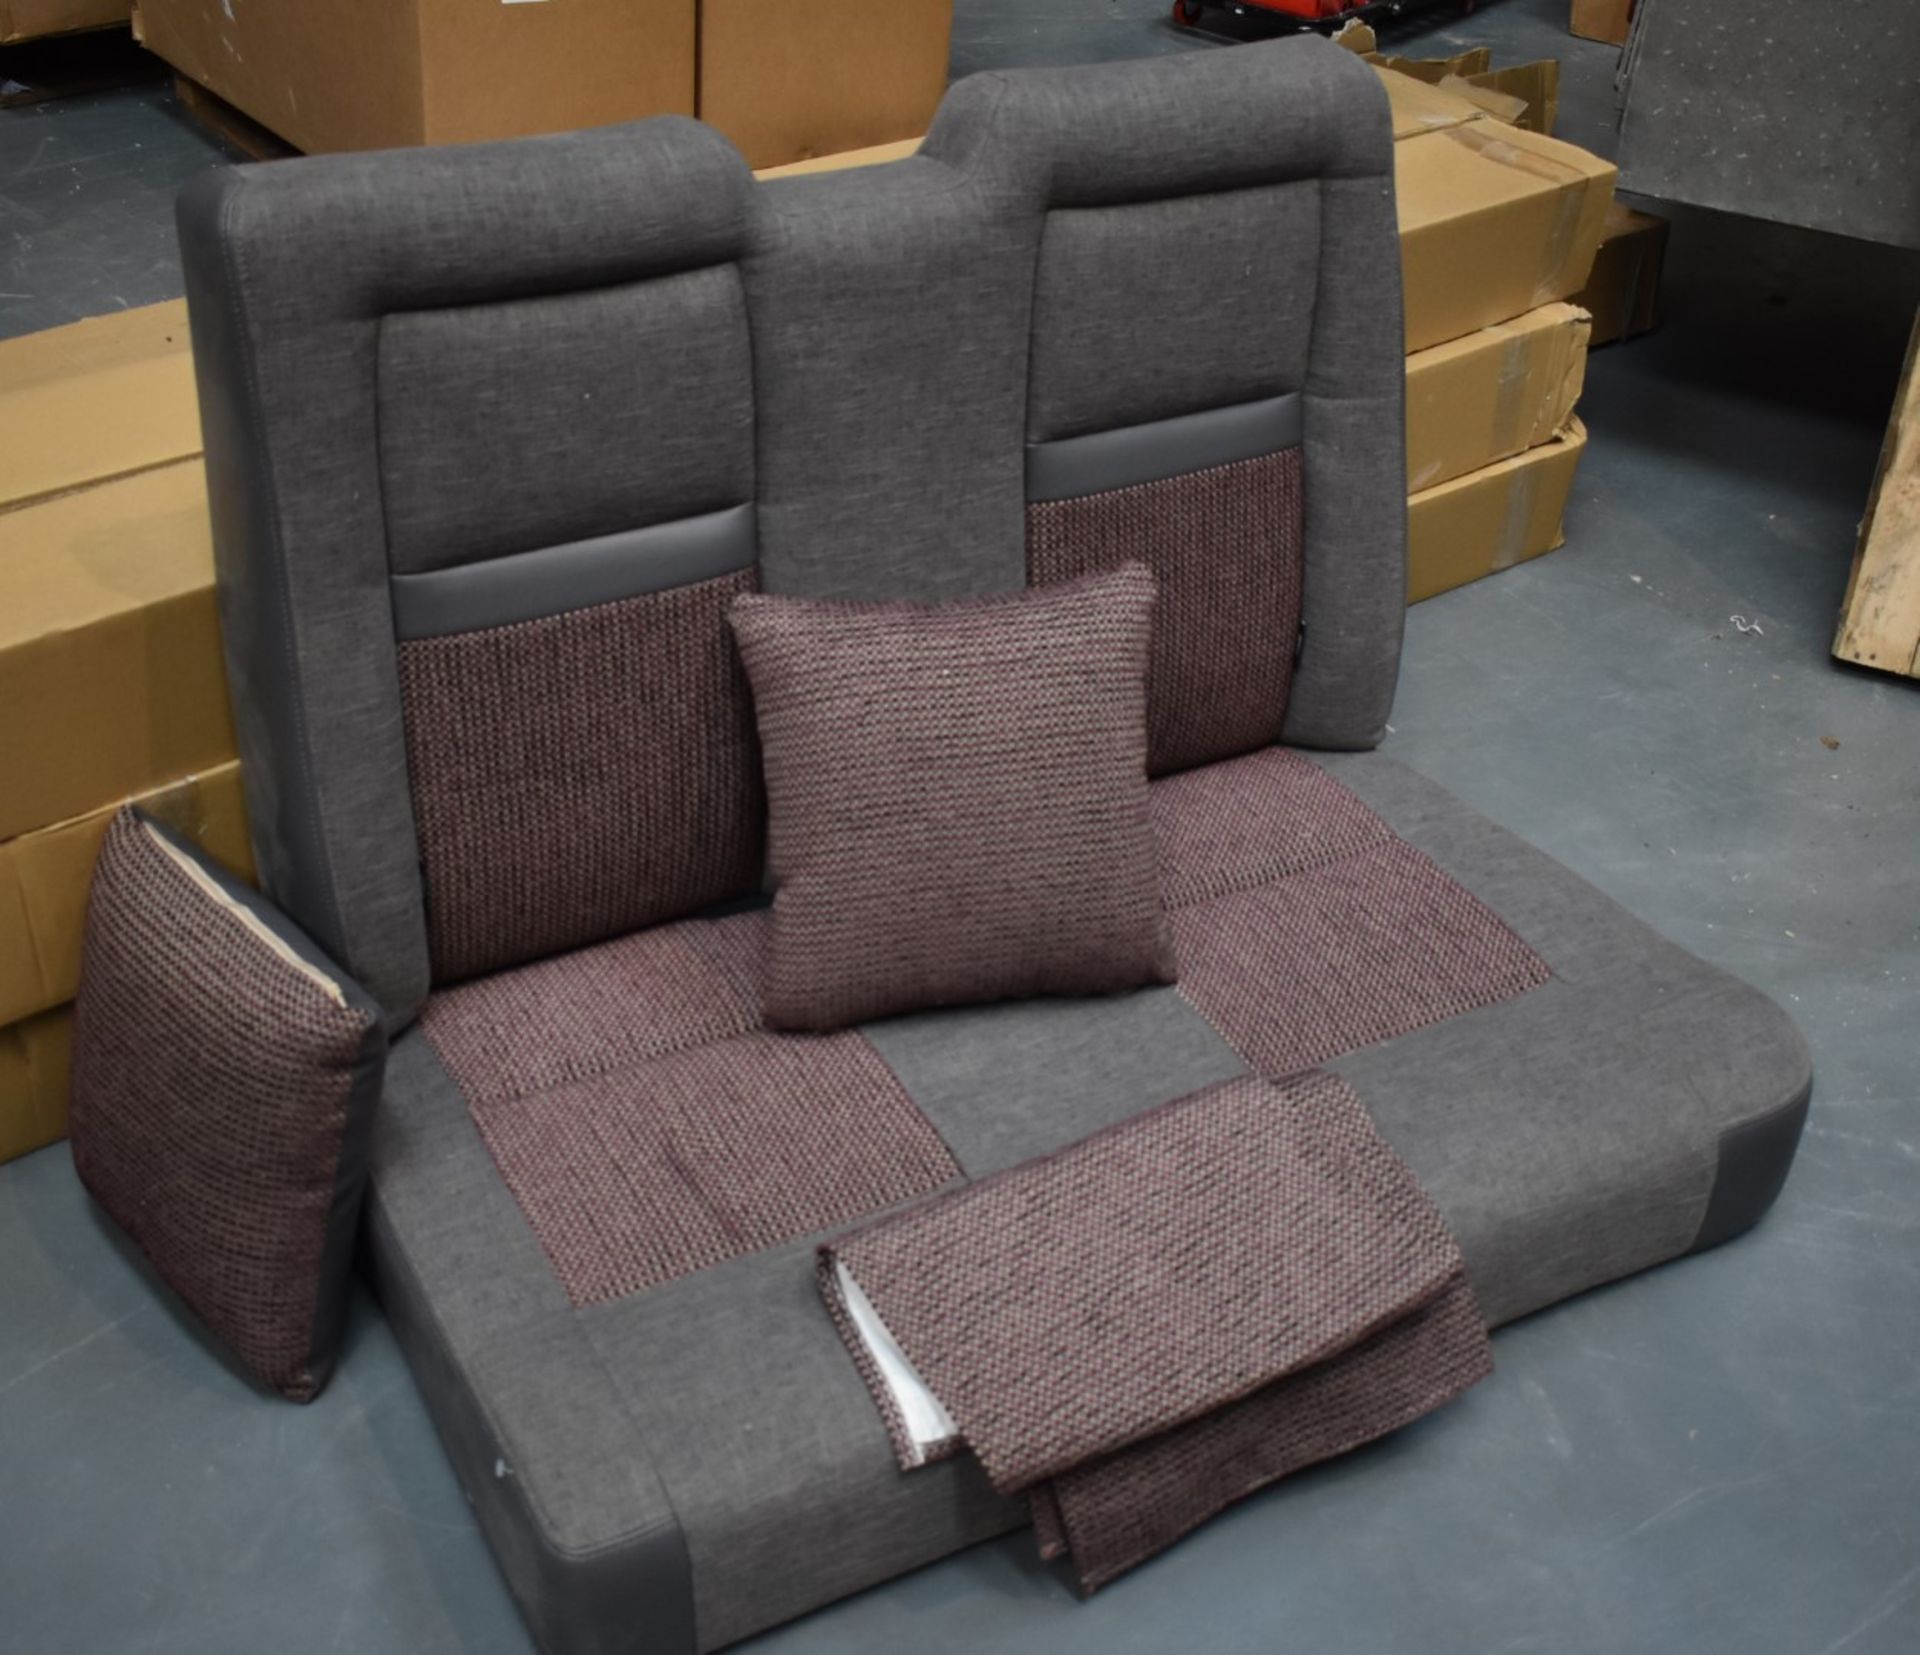 1 x Set of Rear Van Seats With Frame, Seatbelts, Headrests, Pillows, Spare Fabric and Fittings - - Image 2 of 13